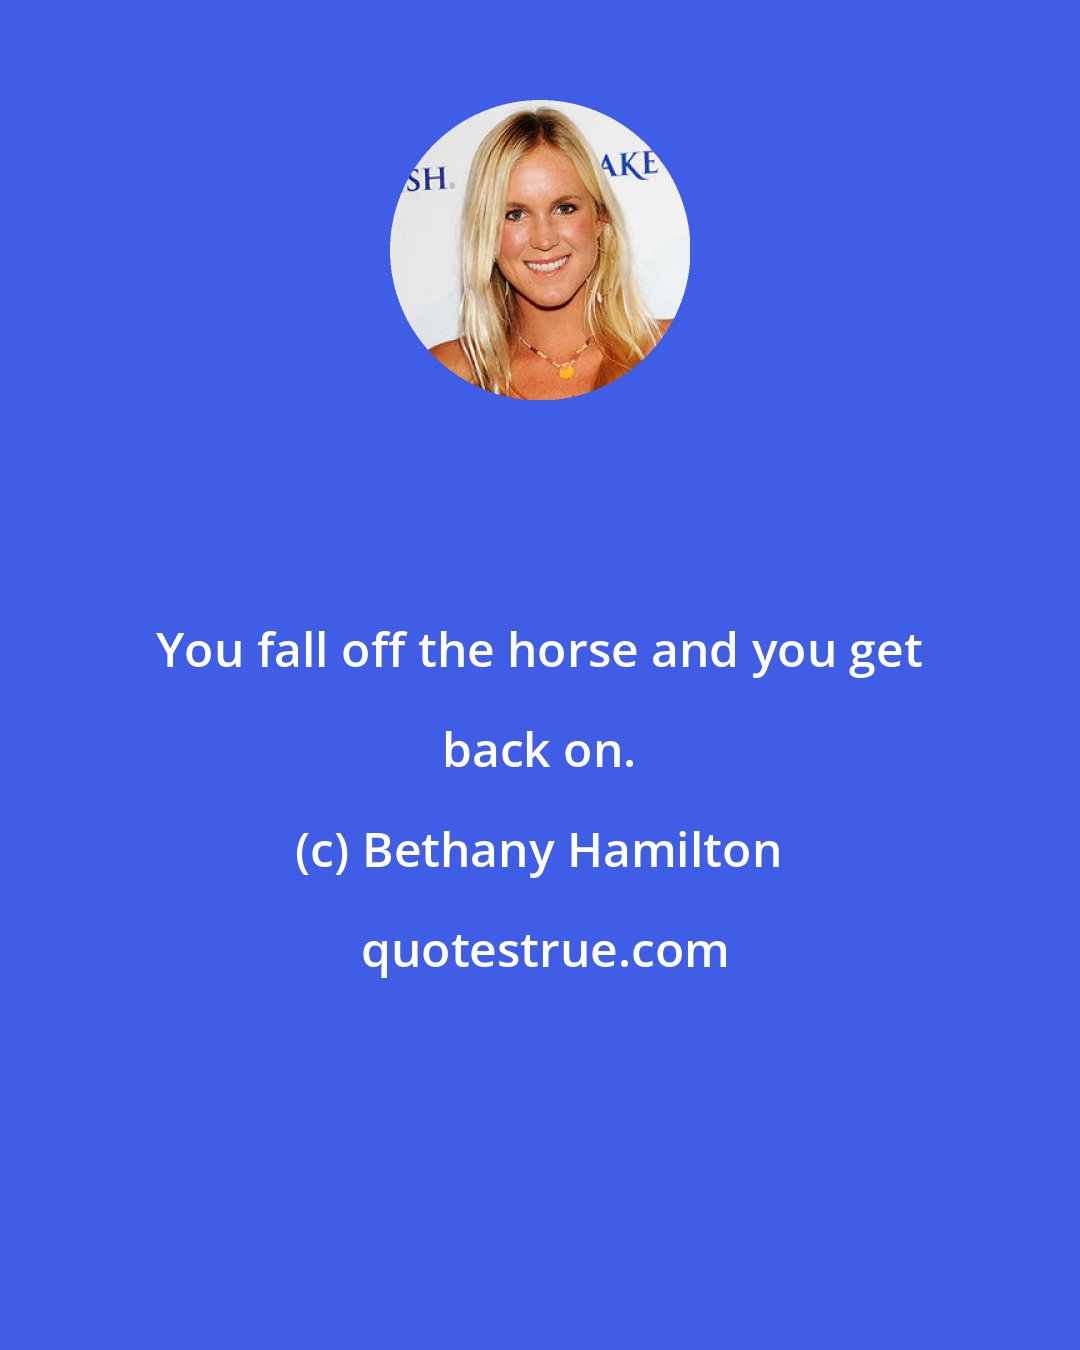 Bethany Hamilton: You fall off the horse and you get back on.